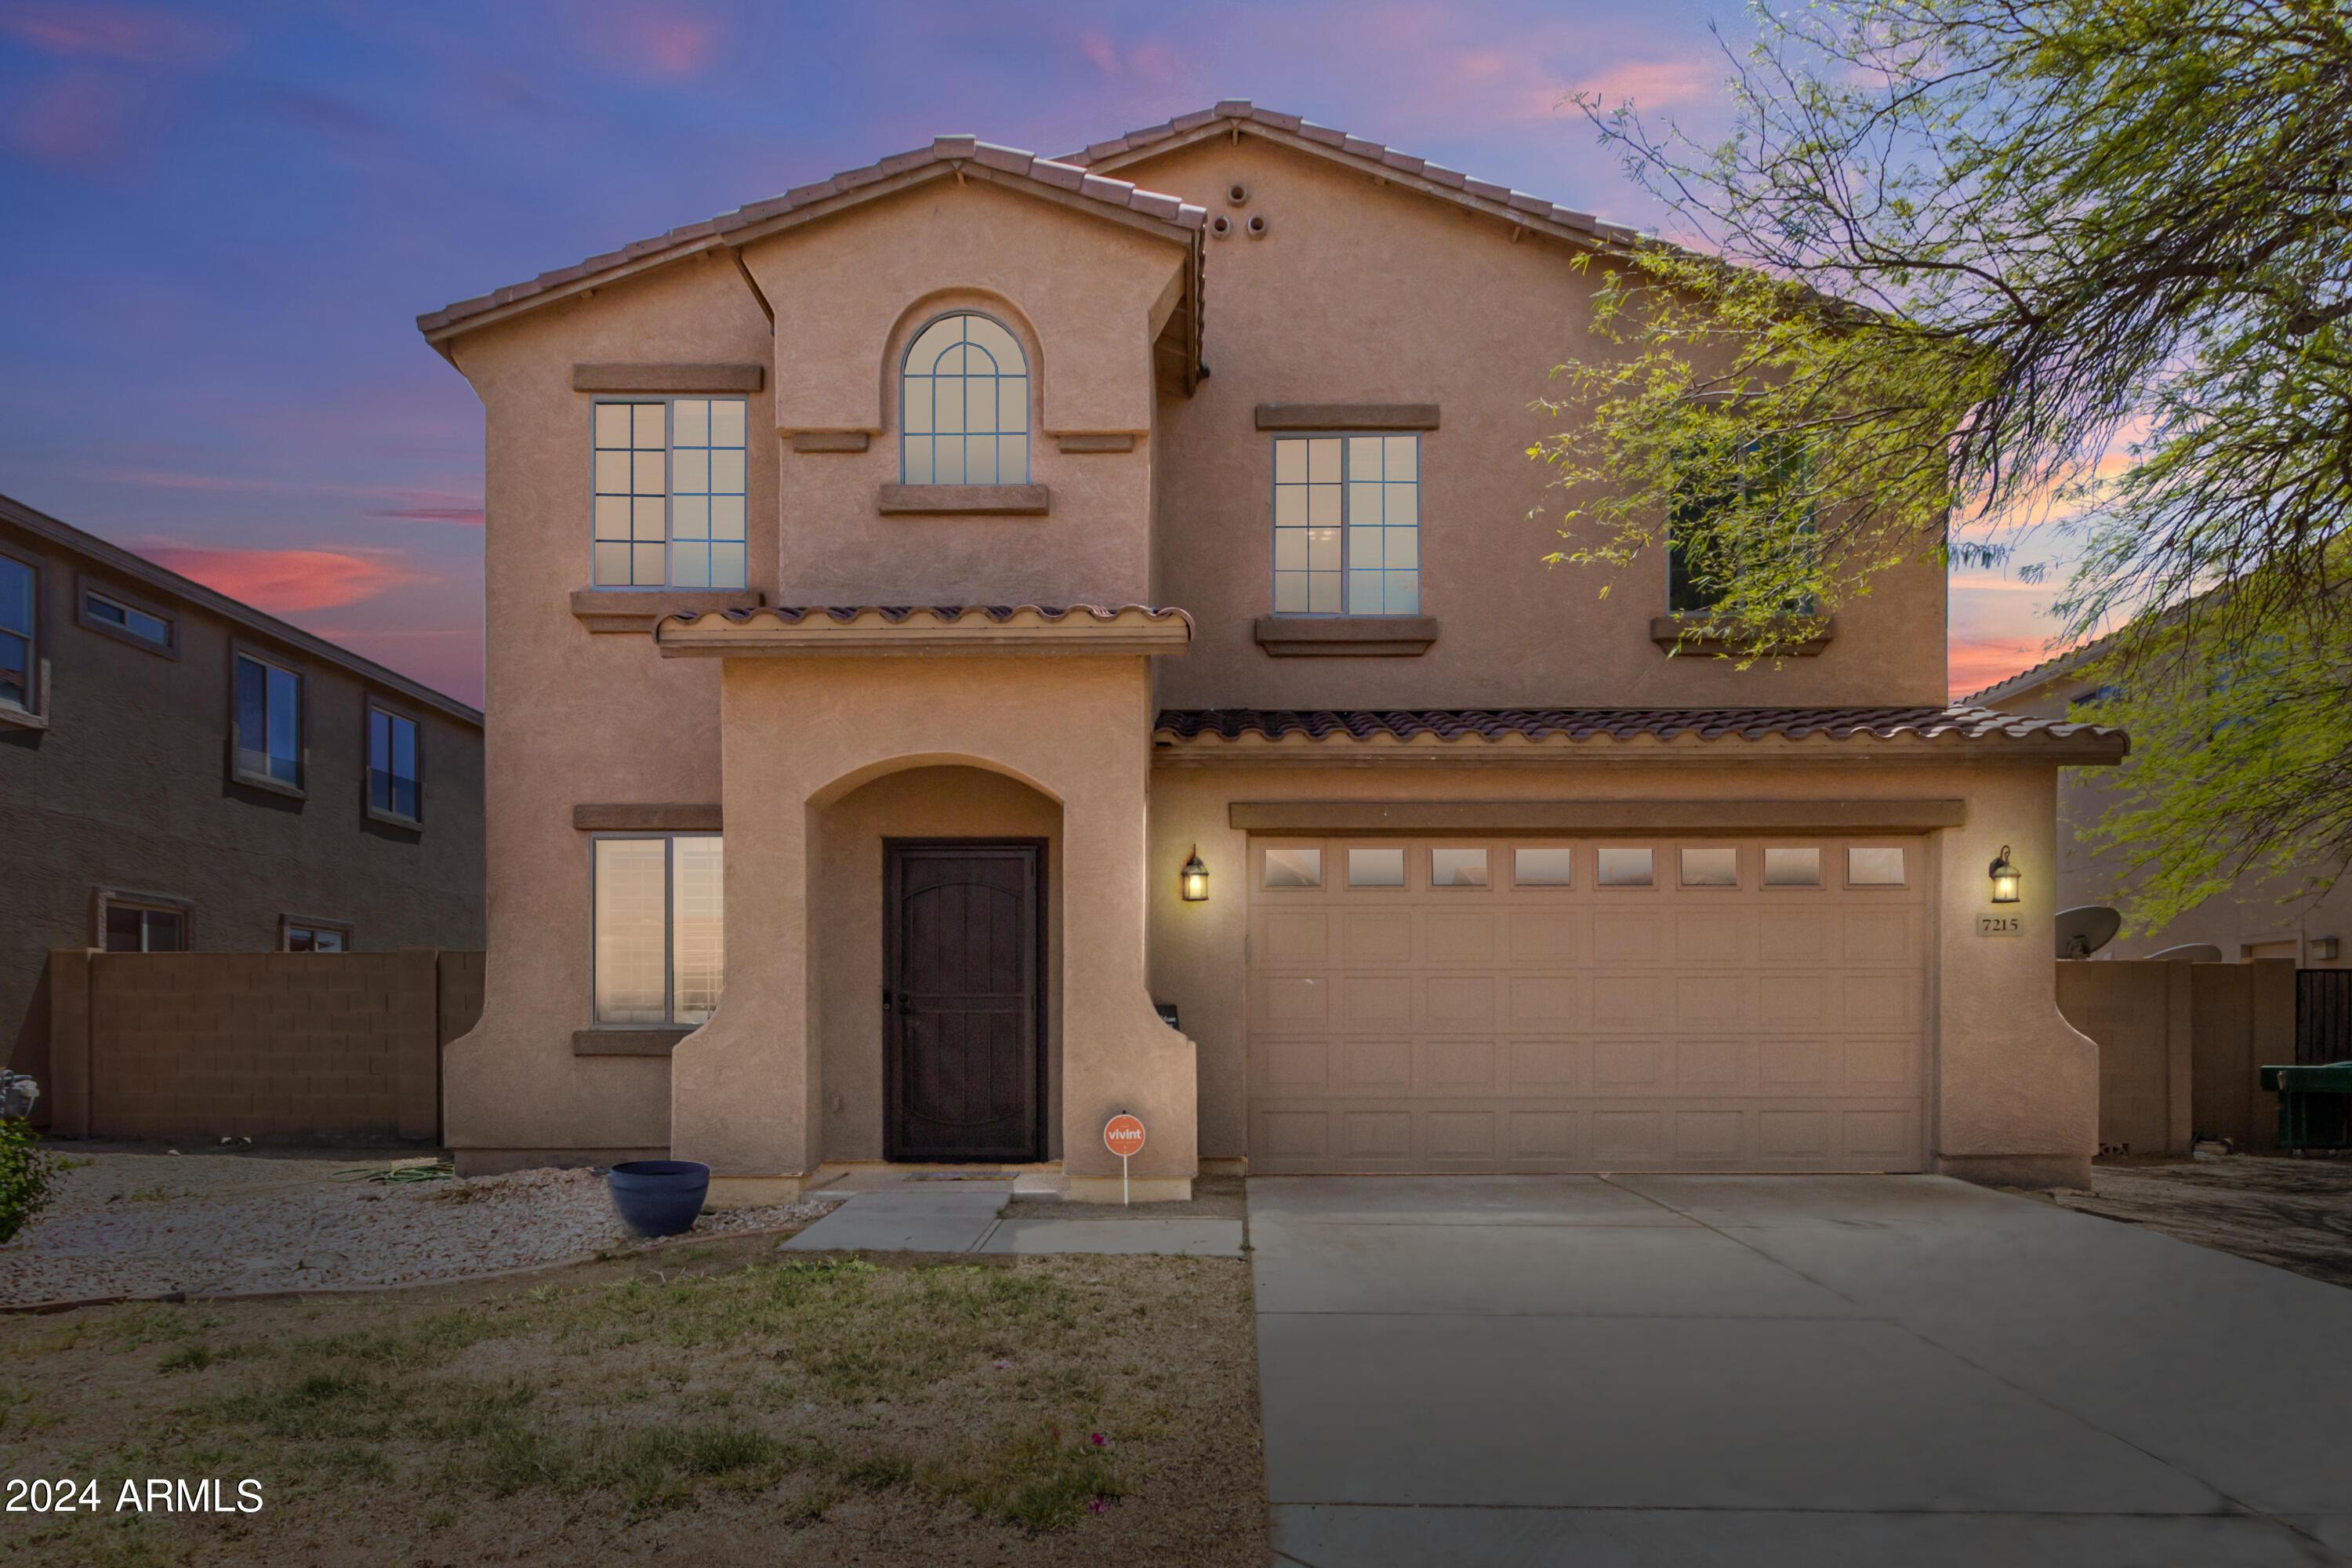 Photo one of 7215 W St Charles Ave Laveen AZ 85339 | MLS 6689852